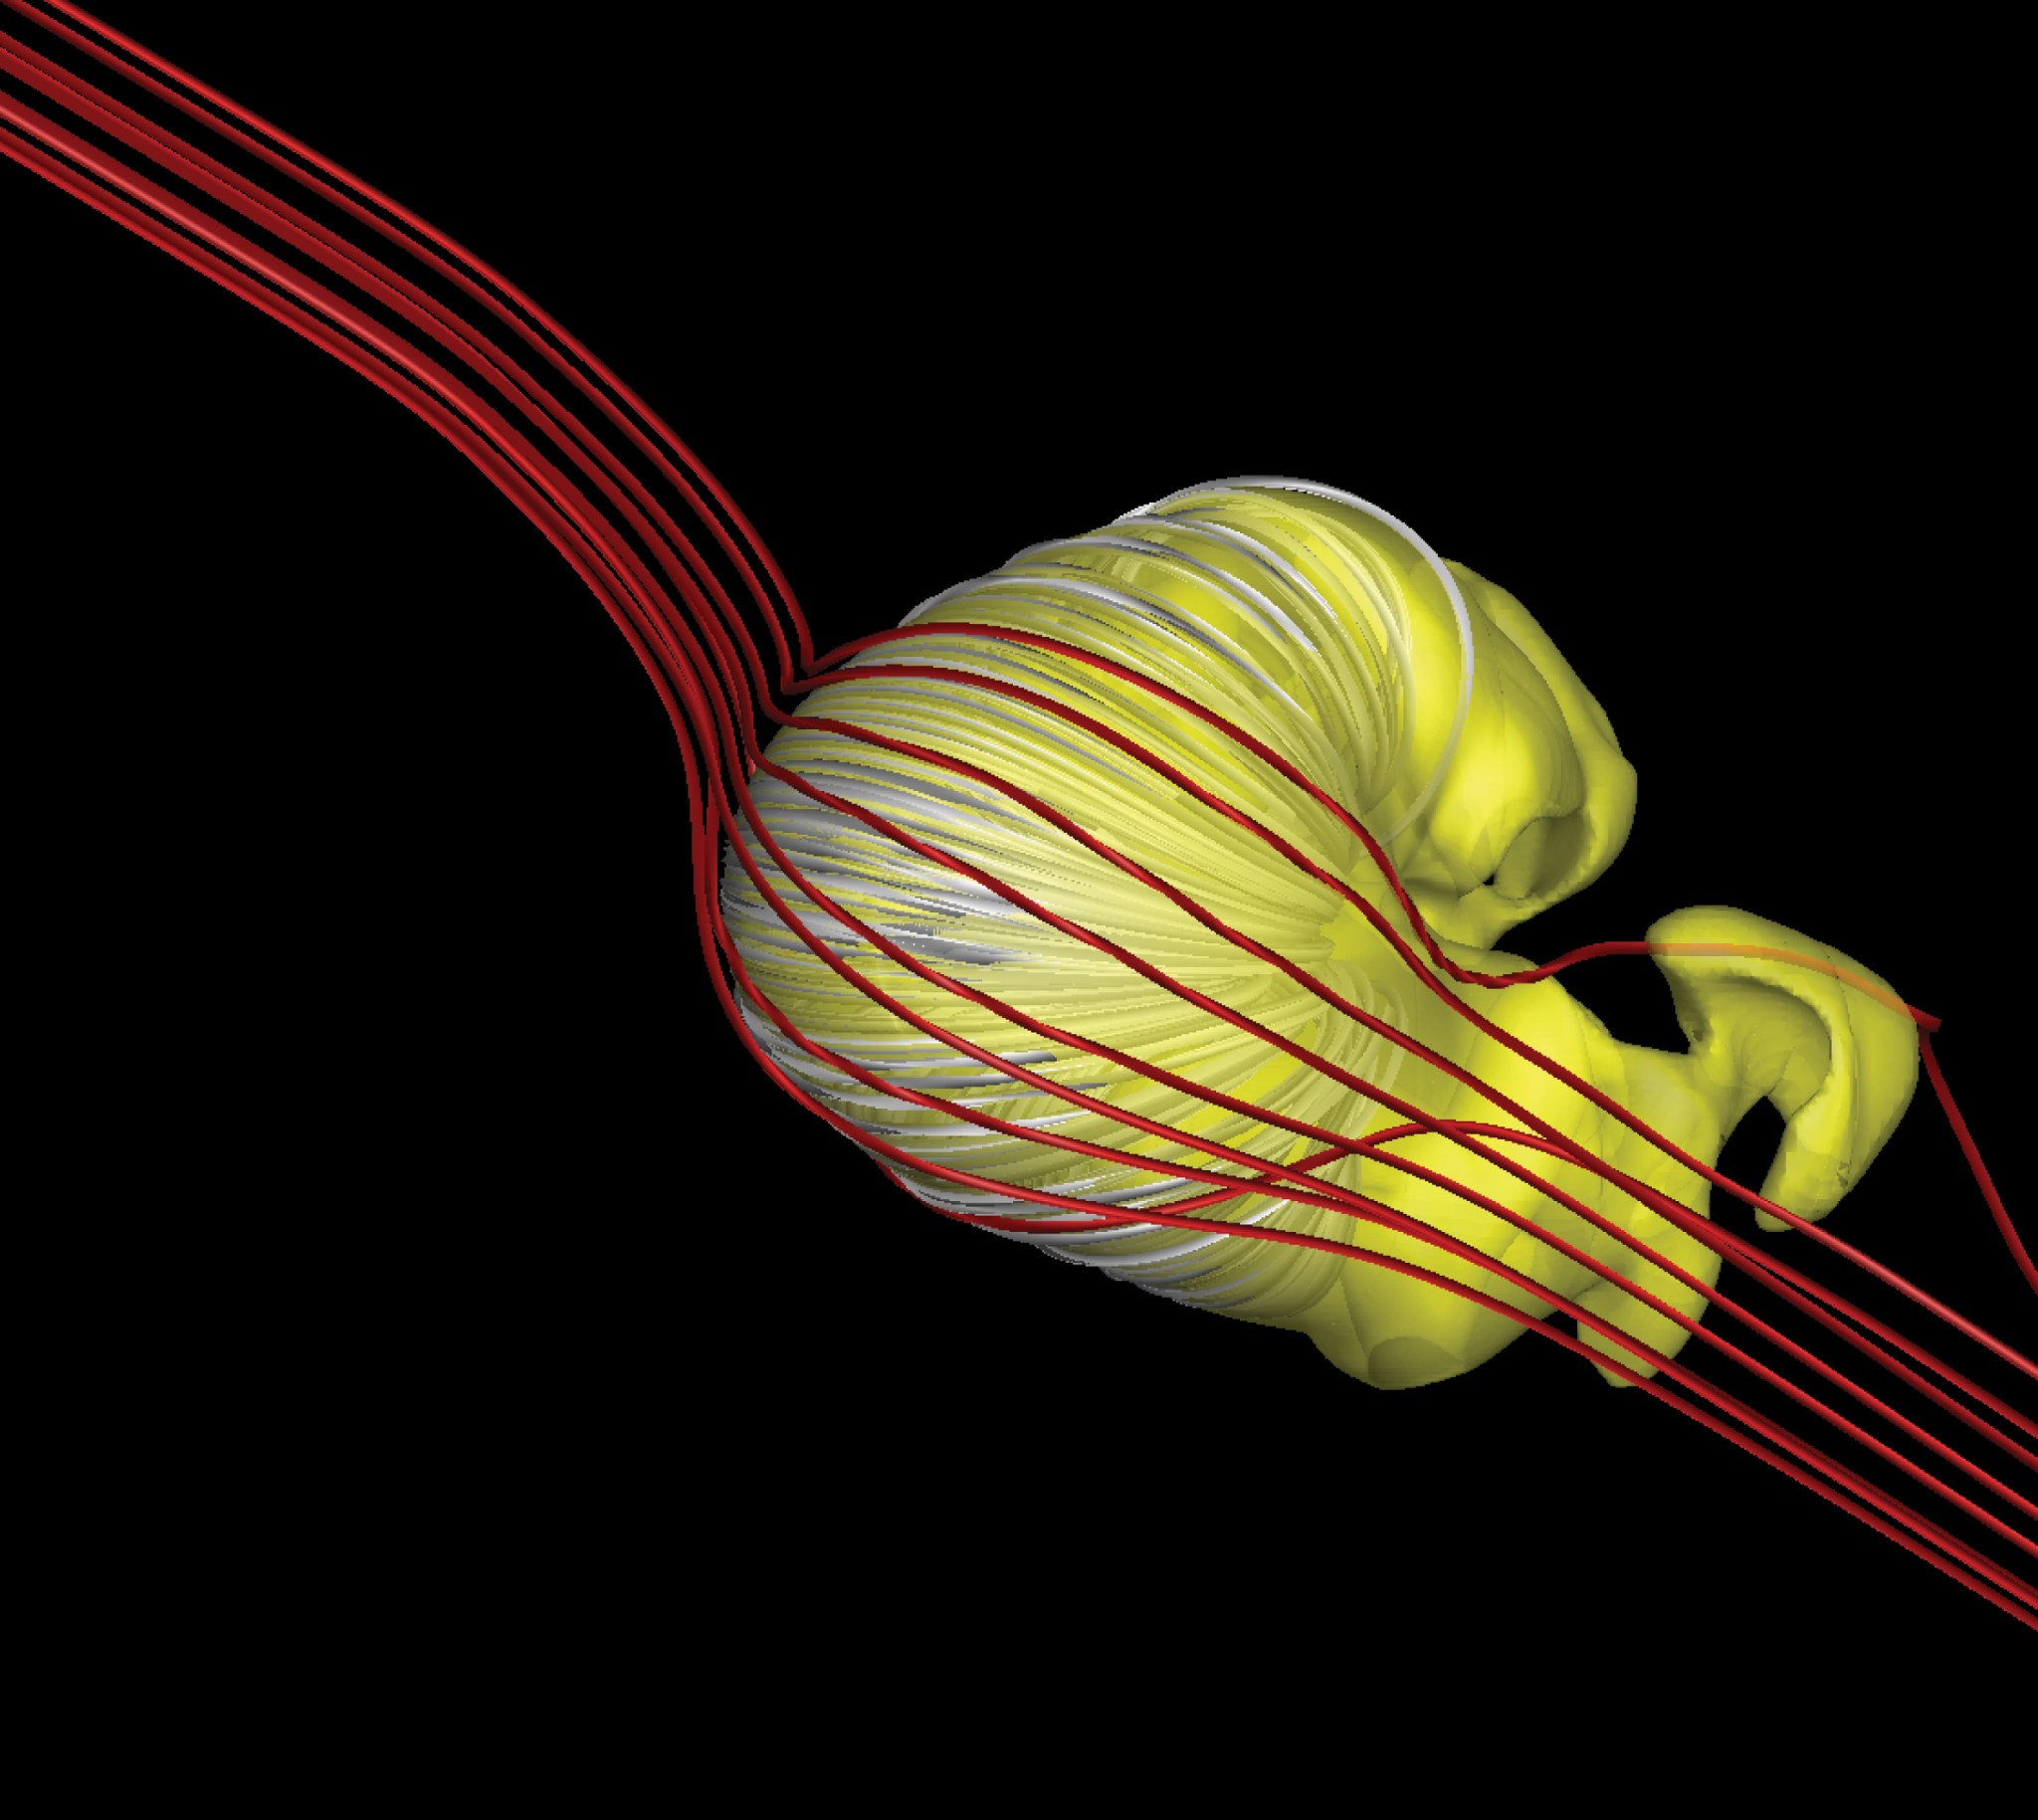 Model showing the heliosphere appearing as a deflated croissant shape, wrapped in the interstellar magnetic field